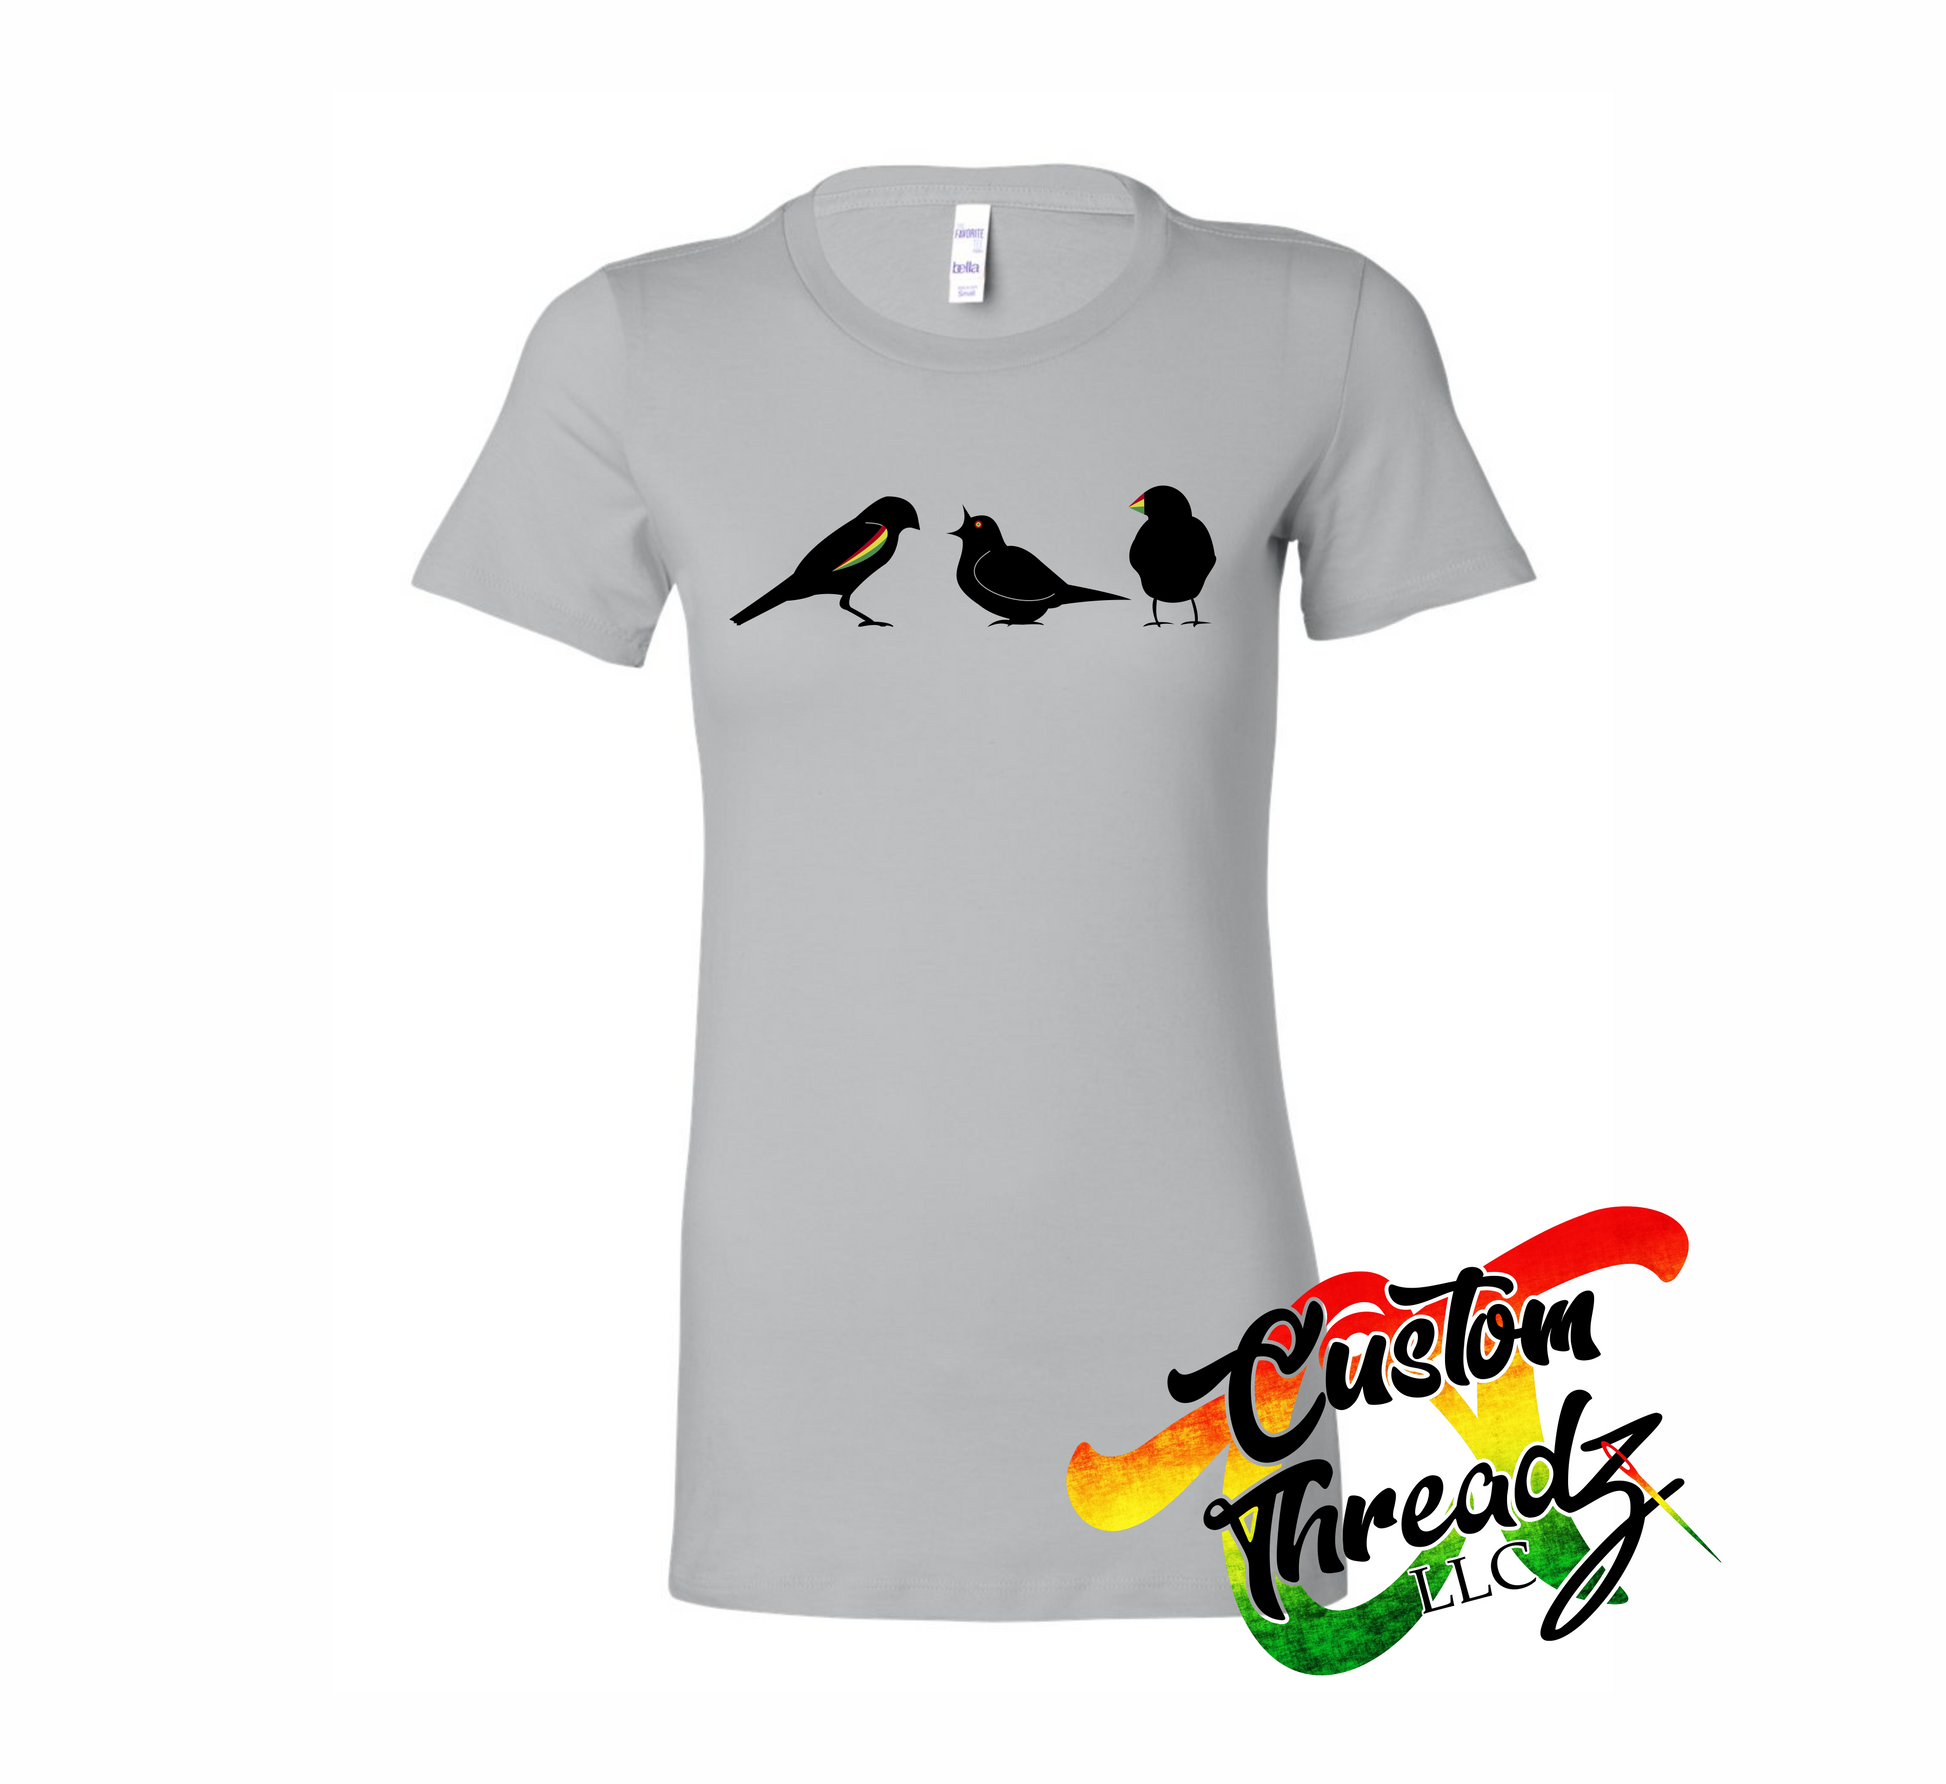 silver grey womens tee with three little birds DTG printed design